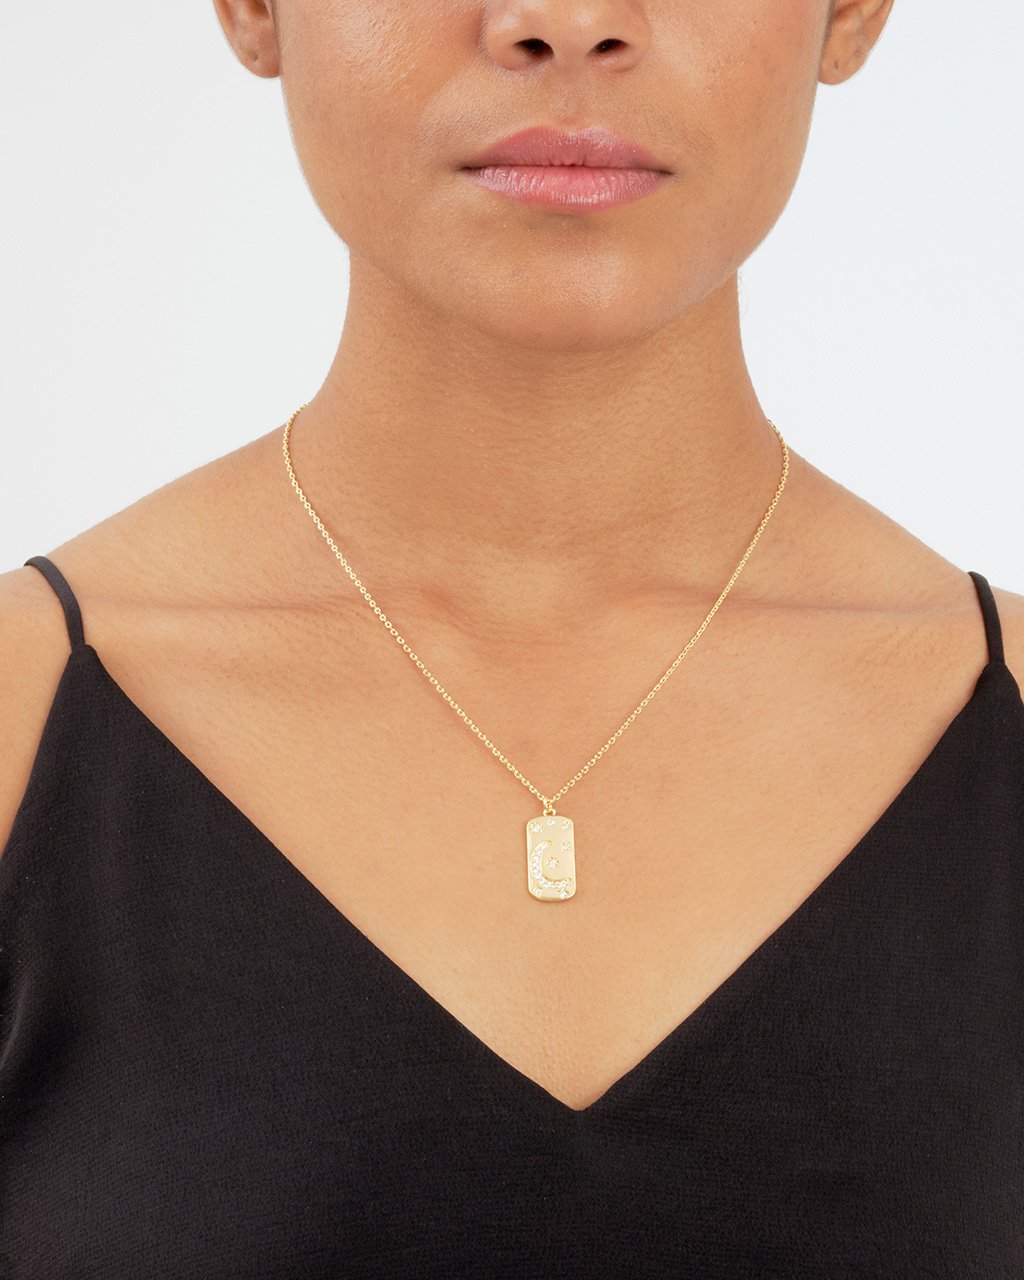 Mini Tag Pendant Necklace, Solid Gold, Free Manual Engraving – Modern Myth